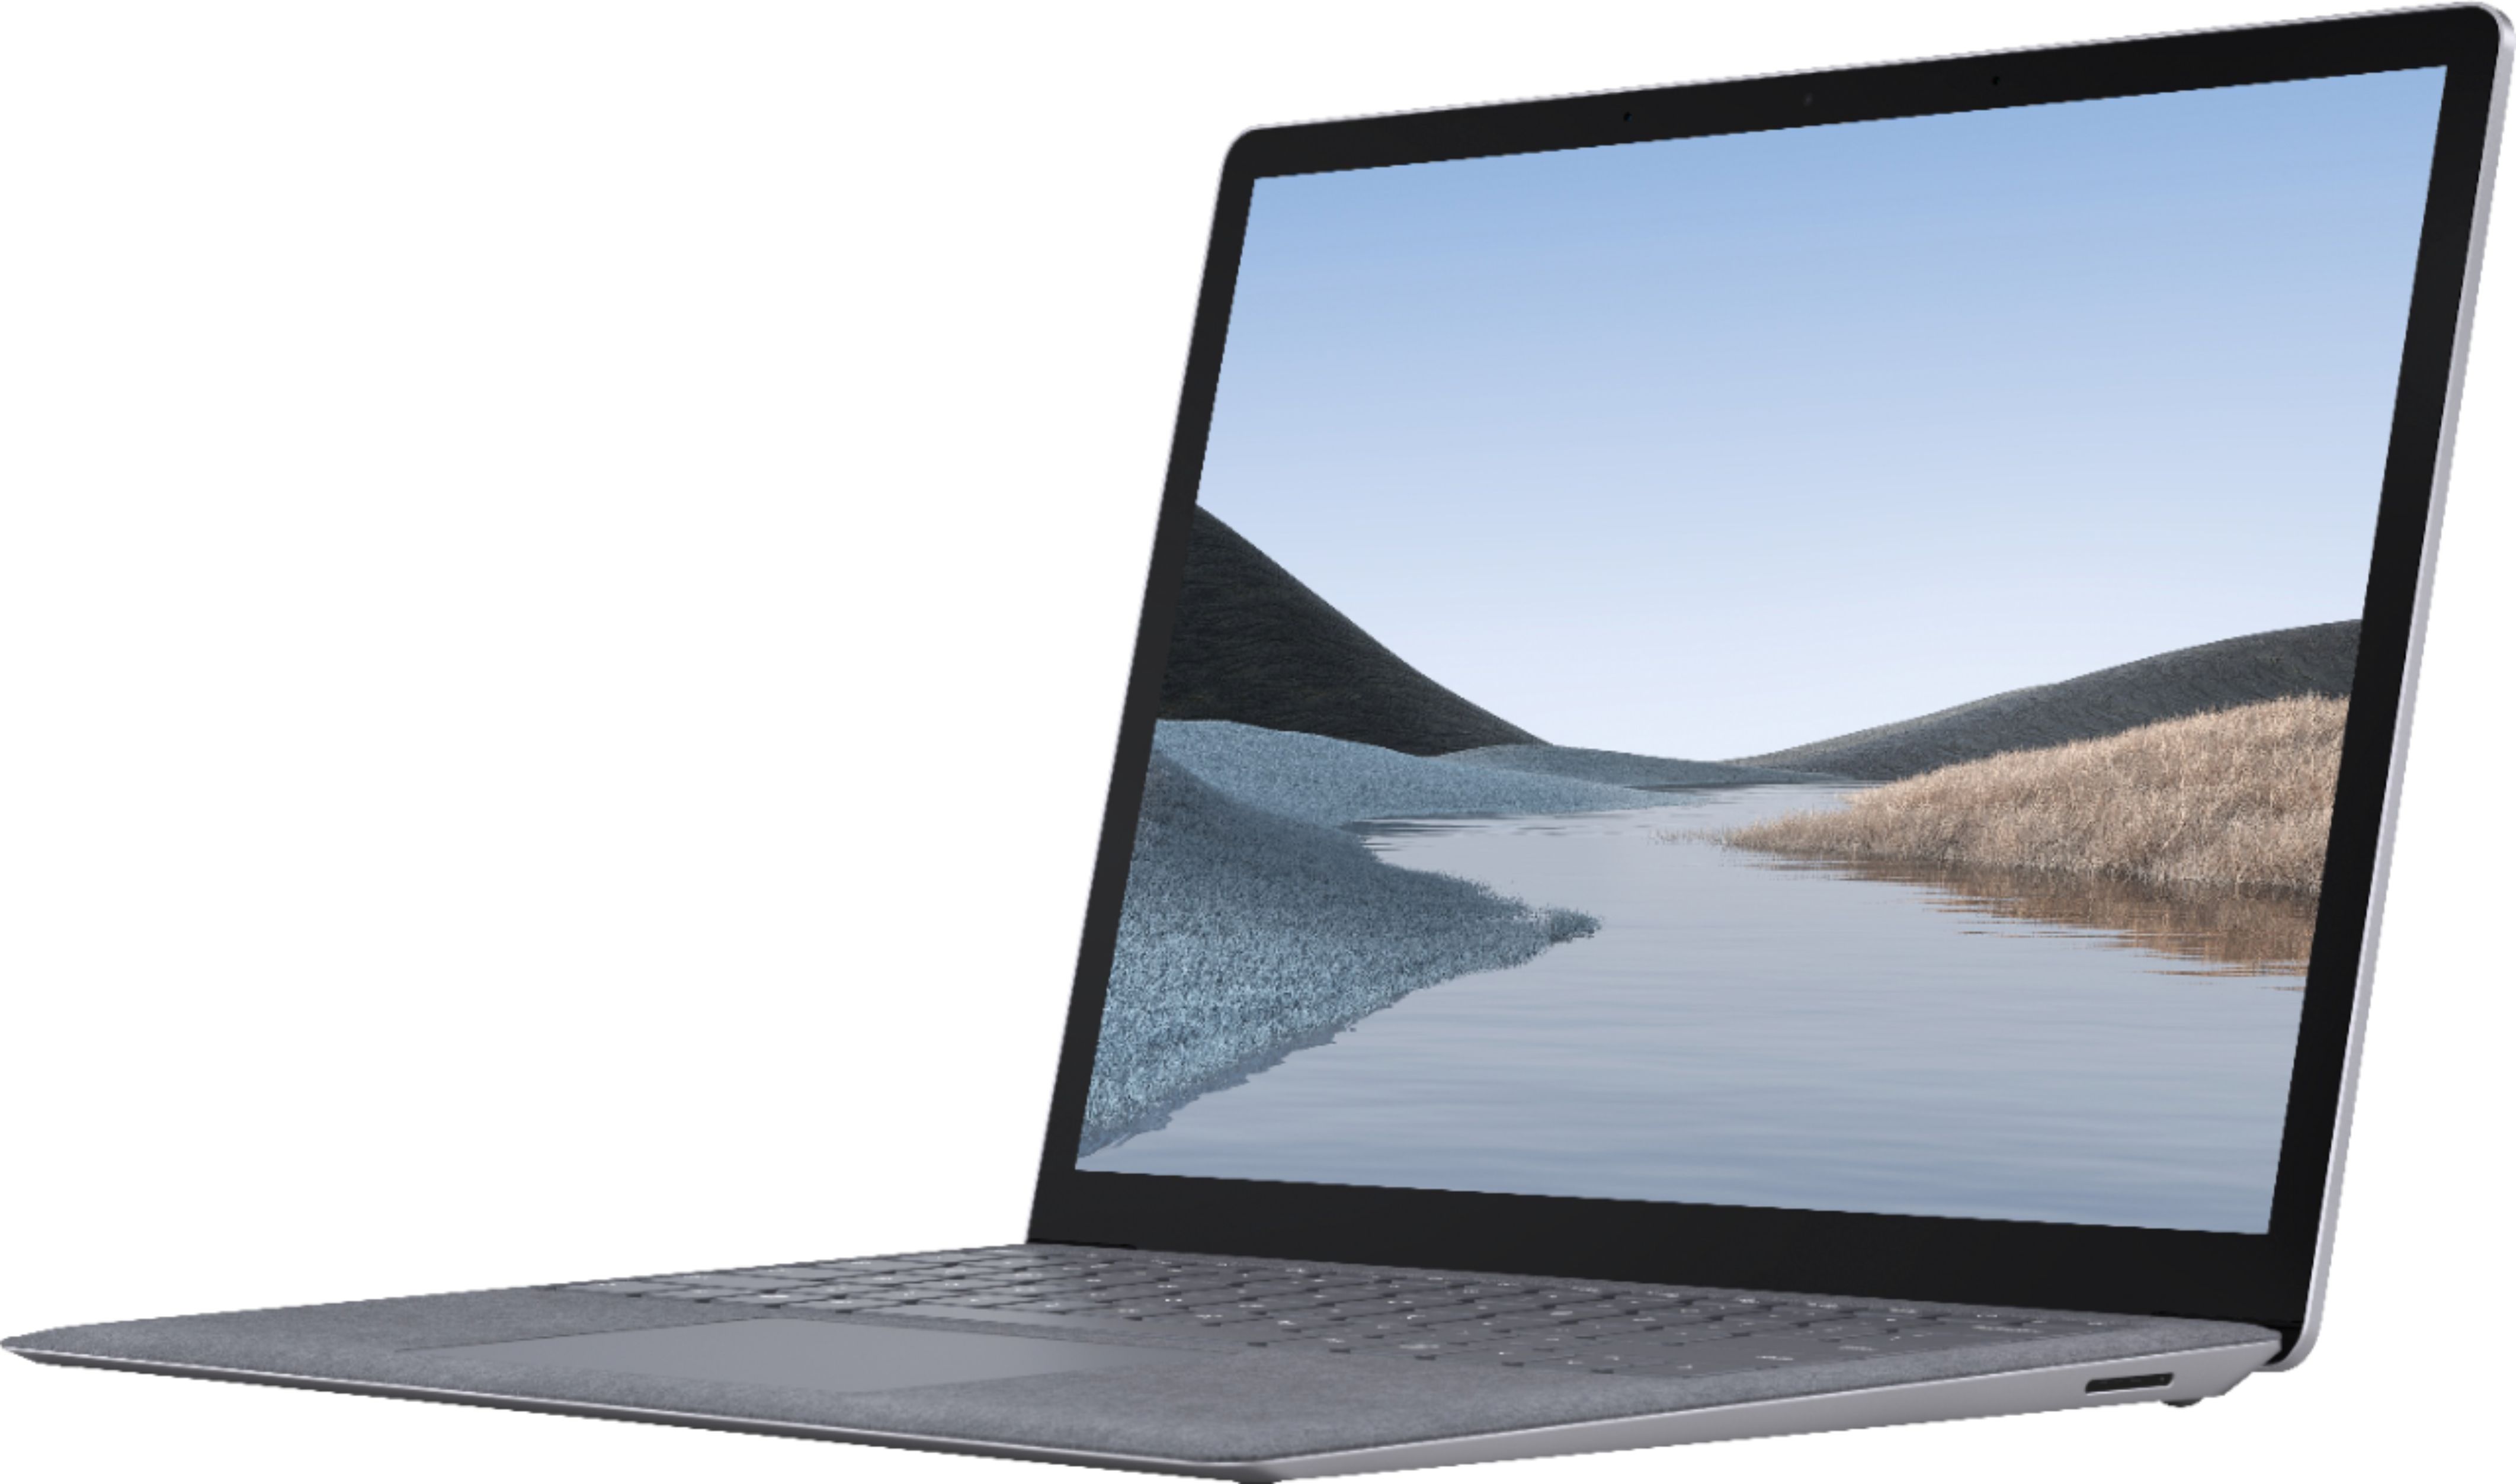 Microsoft - Surface Laptop 3 - 13.5 inch Touch-Screen - Intel Core i5 - 8GB Memory - 128GB Solid State Drive (Latest Model) - Platinum - 9.99